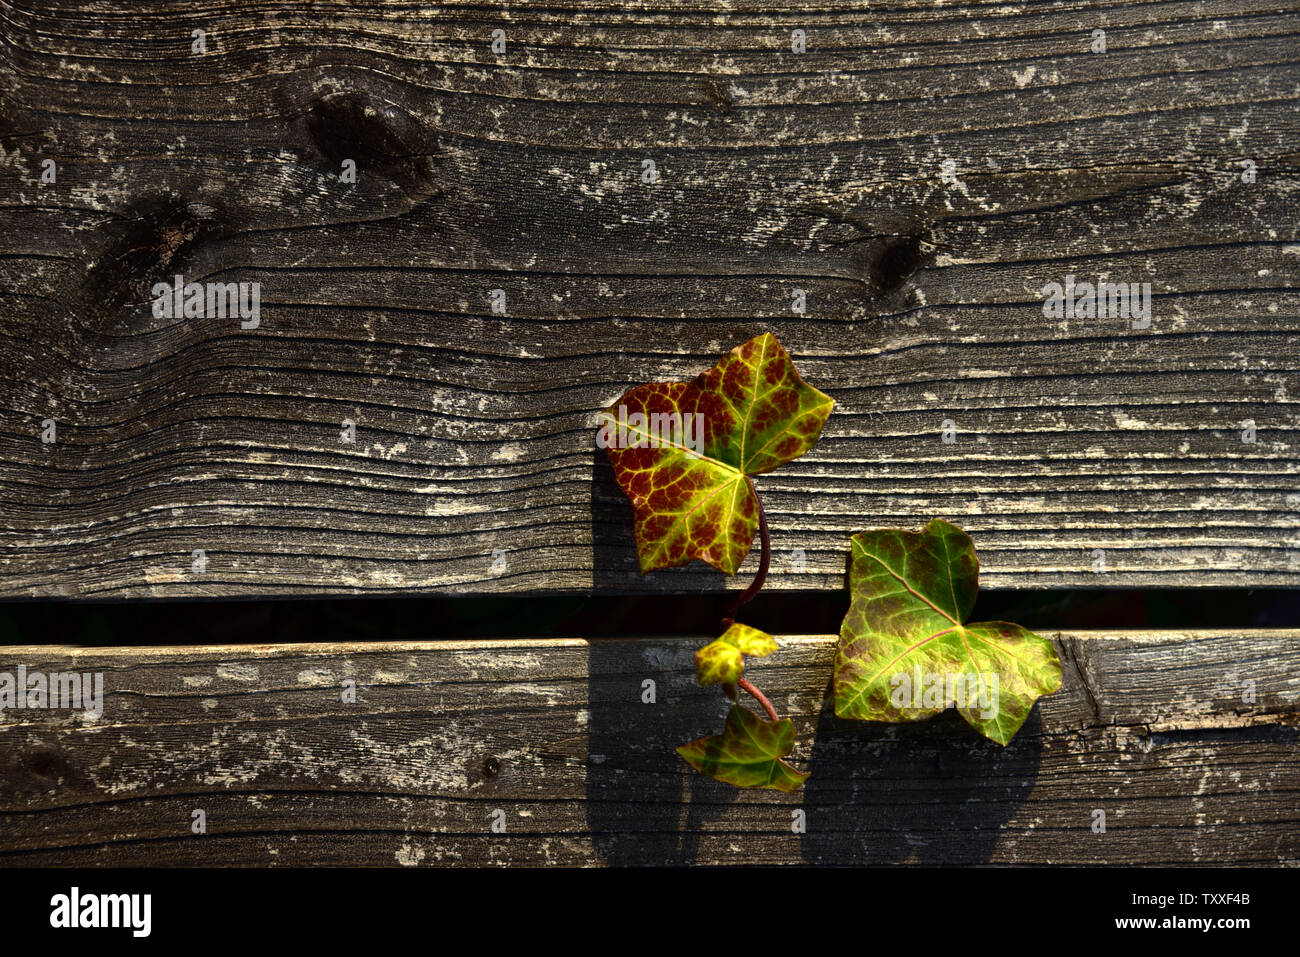 Background of wooden slats of a brown wooden fence with ivy leaves growing out of it Stock Photo